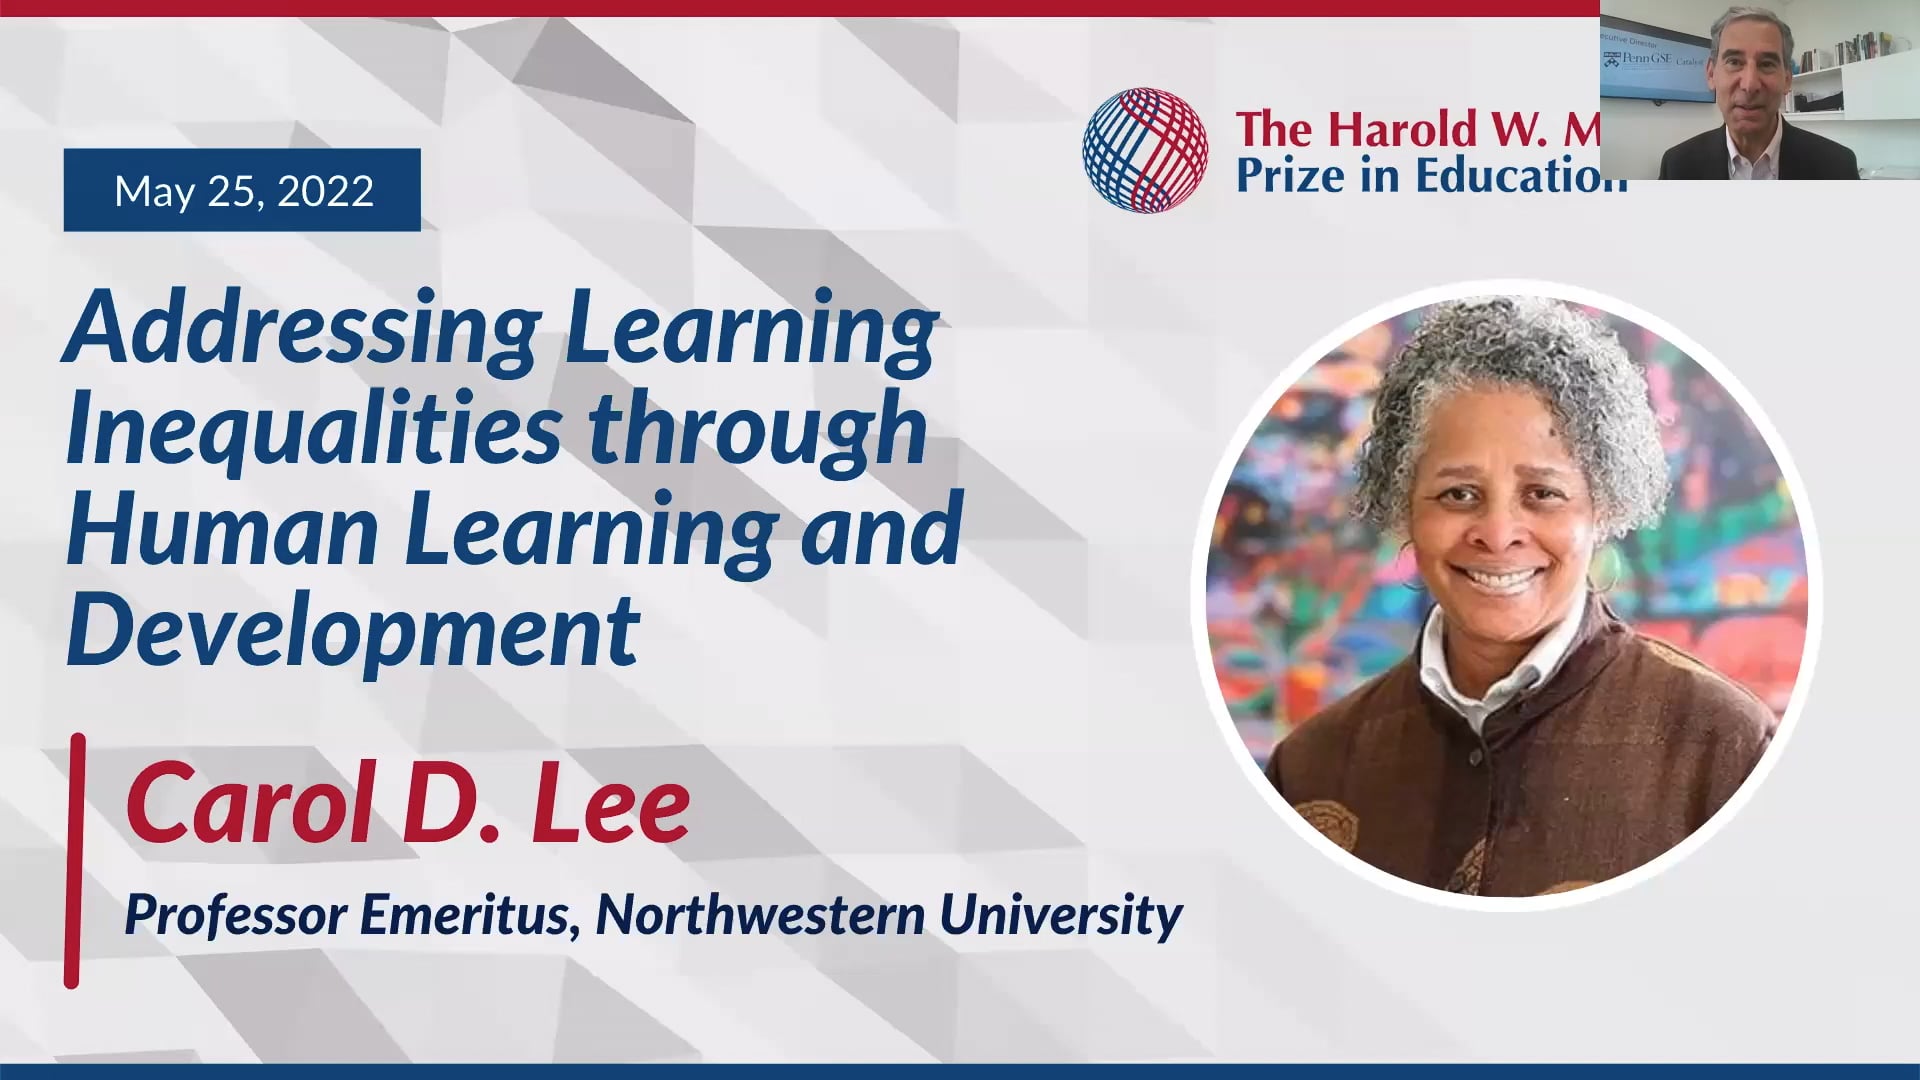 Play video: Addressing Learning Inequalities through Human Learning and Development